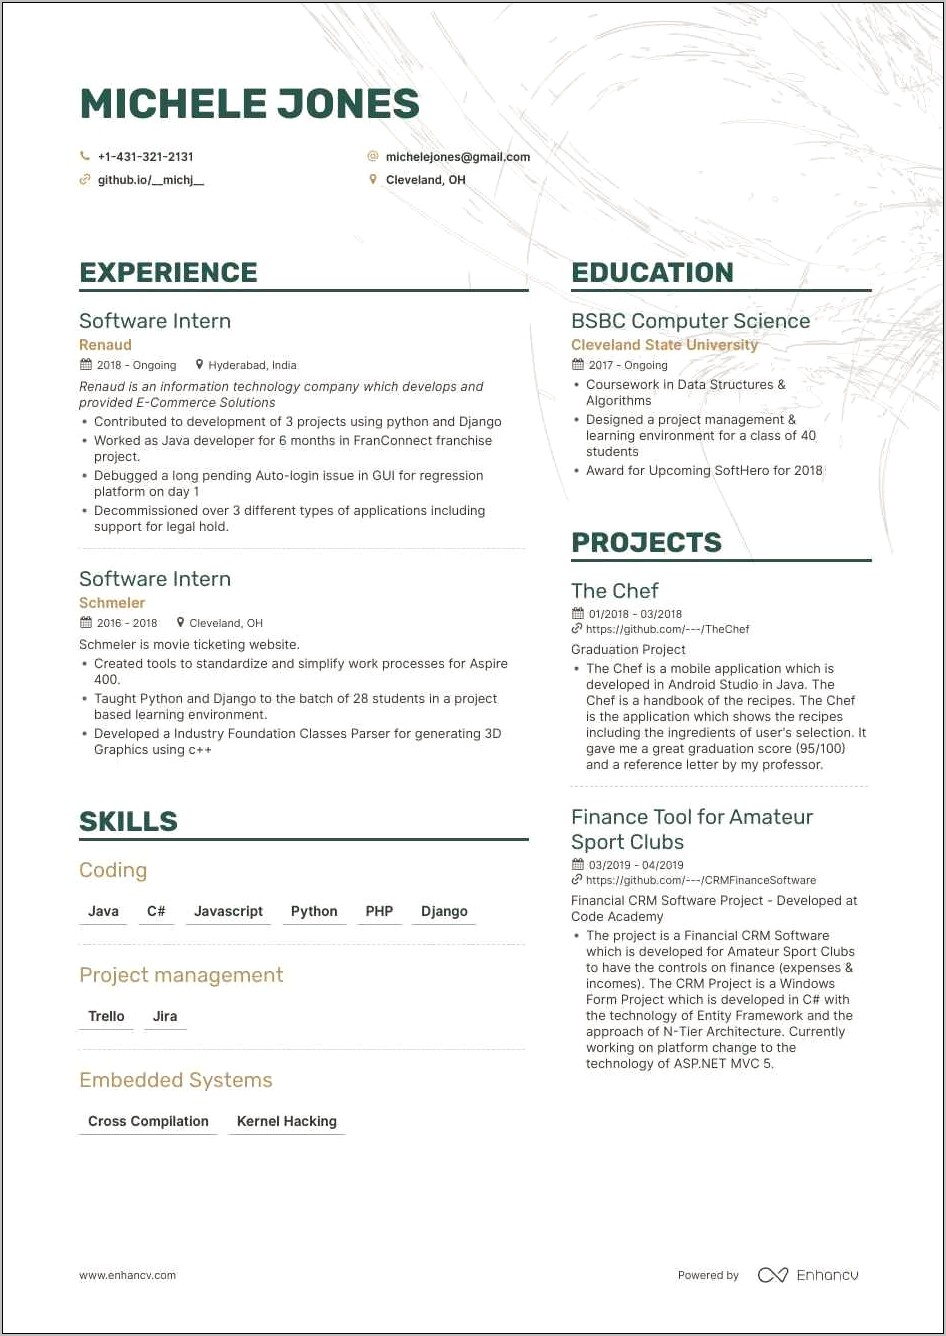 Sample Projects For Entry Level Testing Resume